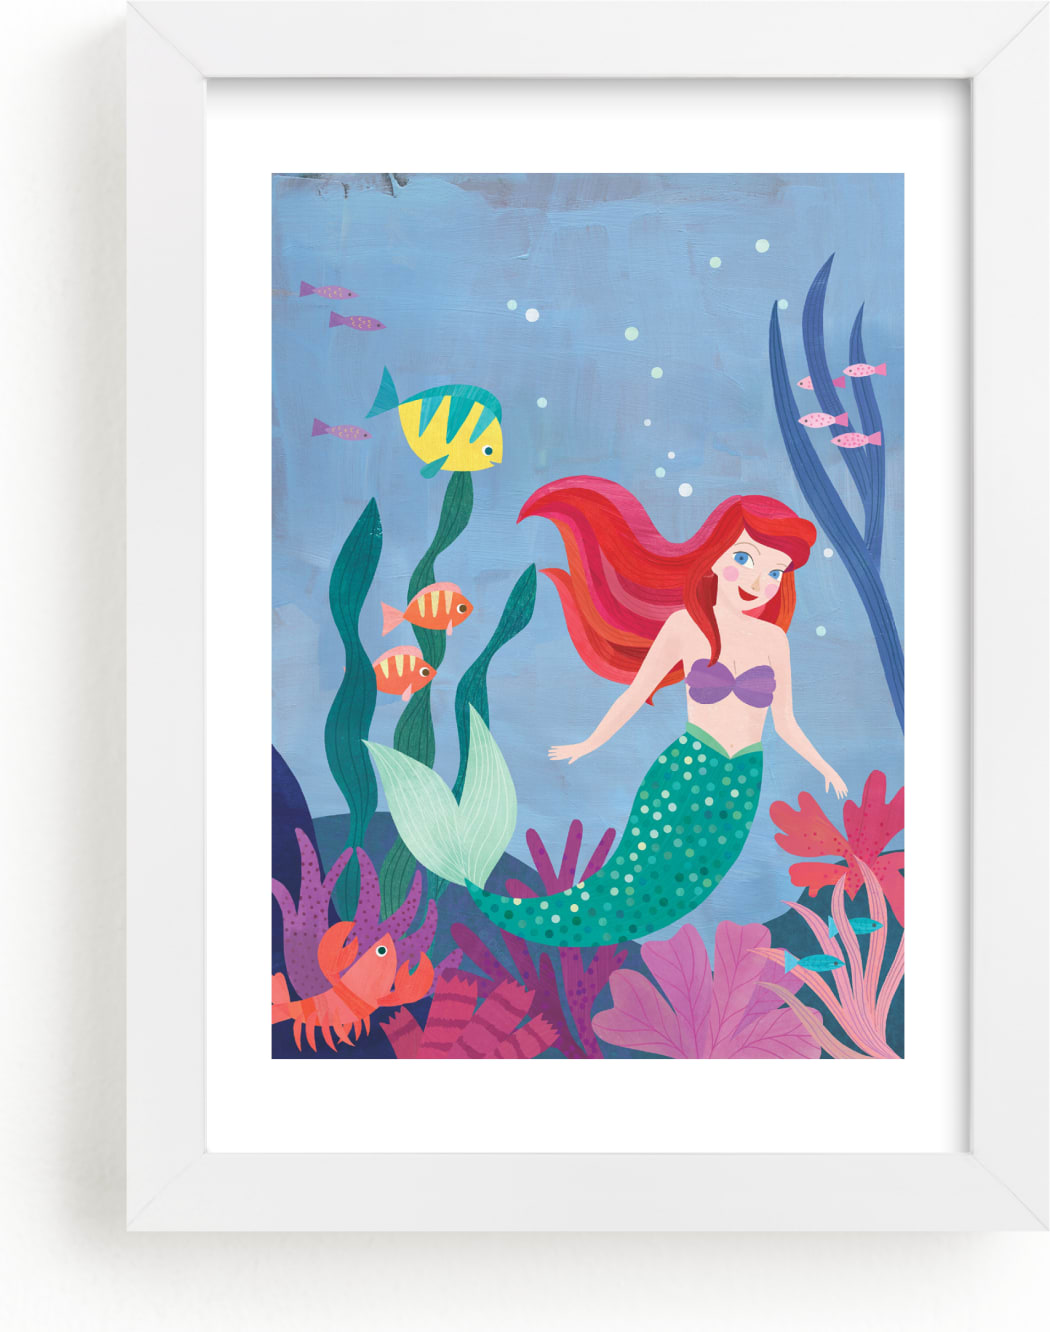 This is a blue disney art by melanie mikecz called Disney's Ariel & Friends.